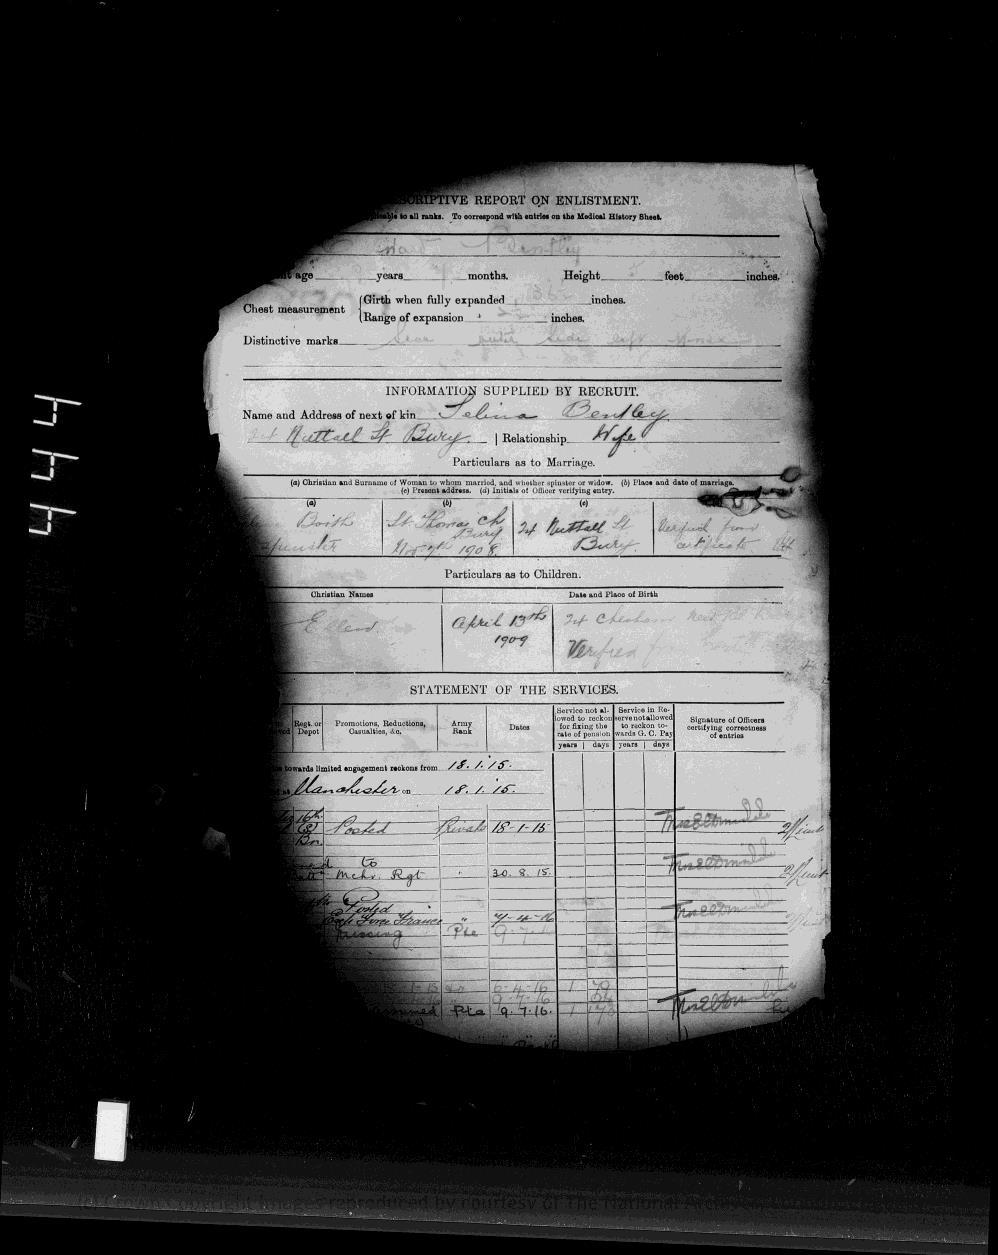 4 P a g e This document provides a physical description of Edward and shows was married to Selina in November 1908 and they had a child in April 1909.